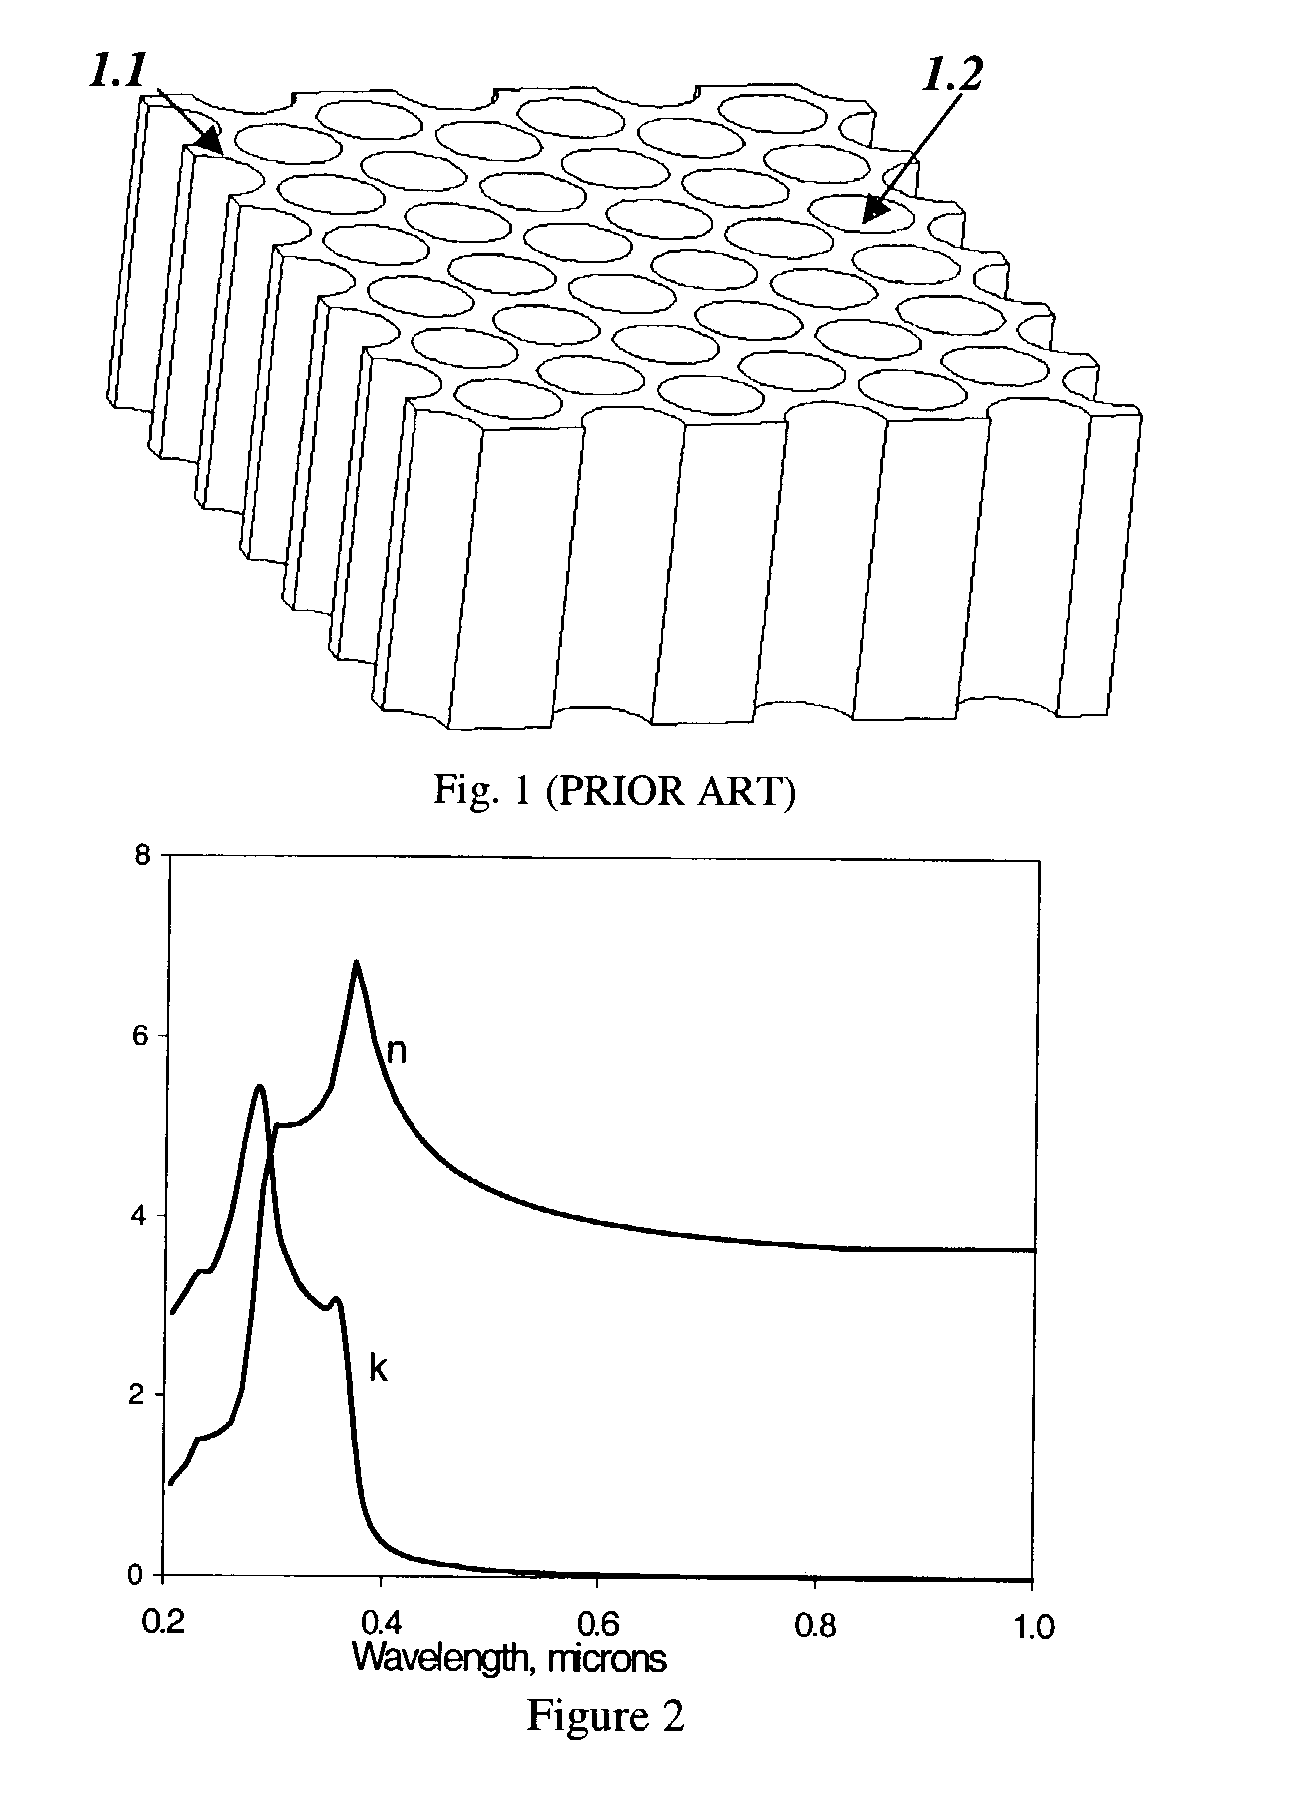 Method of manufacturing a spectral filter for green and shorter wavelengths